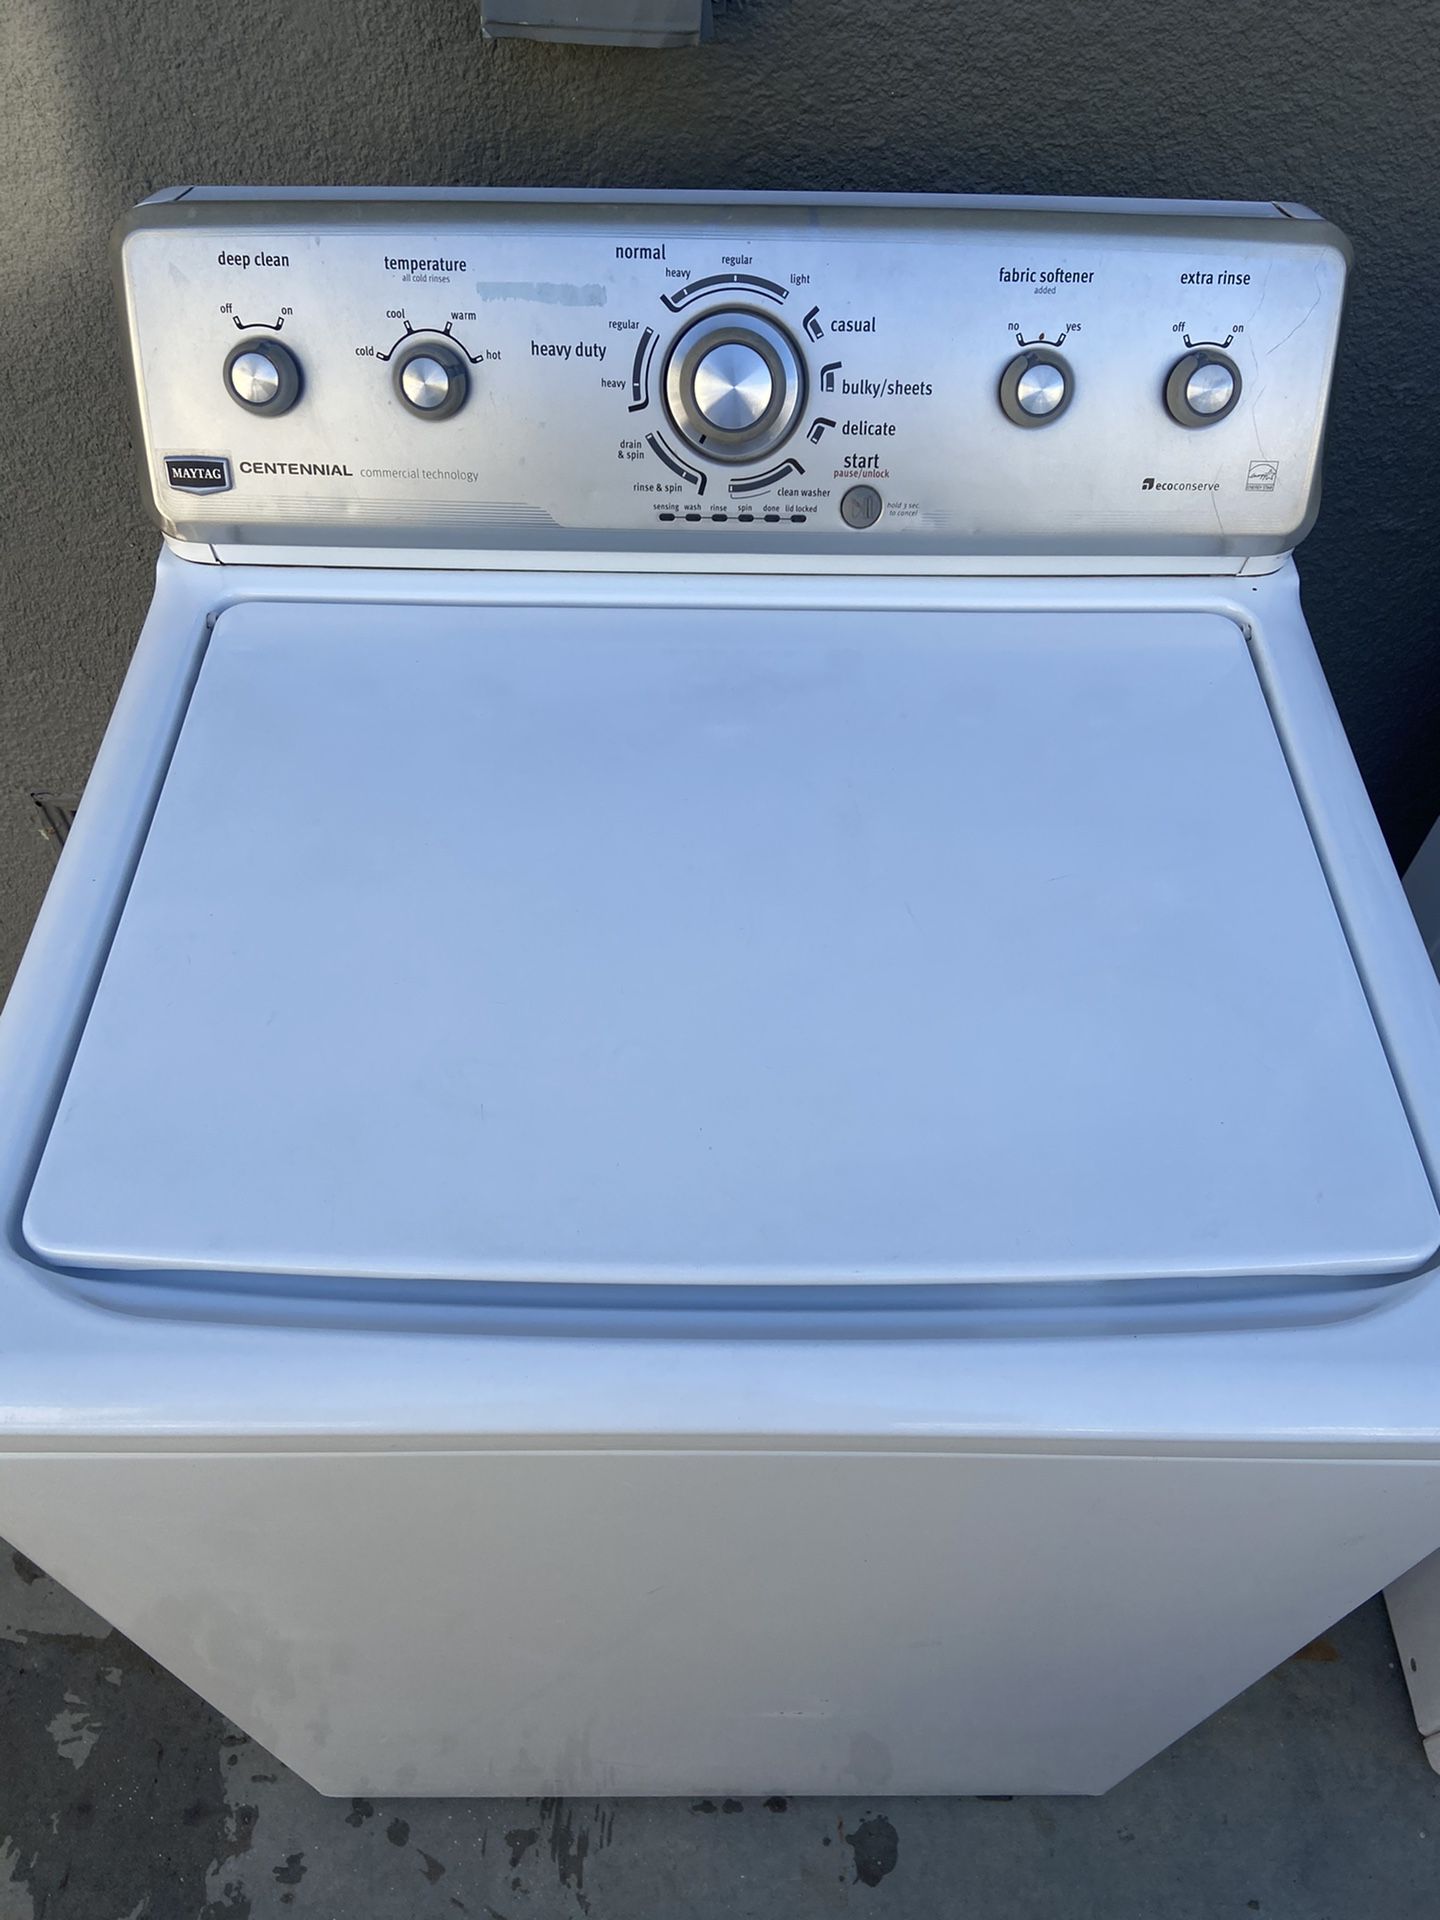 Maytag centennial HE washer. $195 delivered and installed